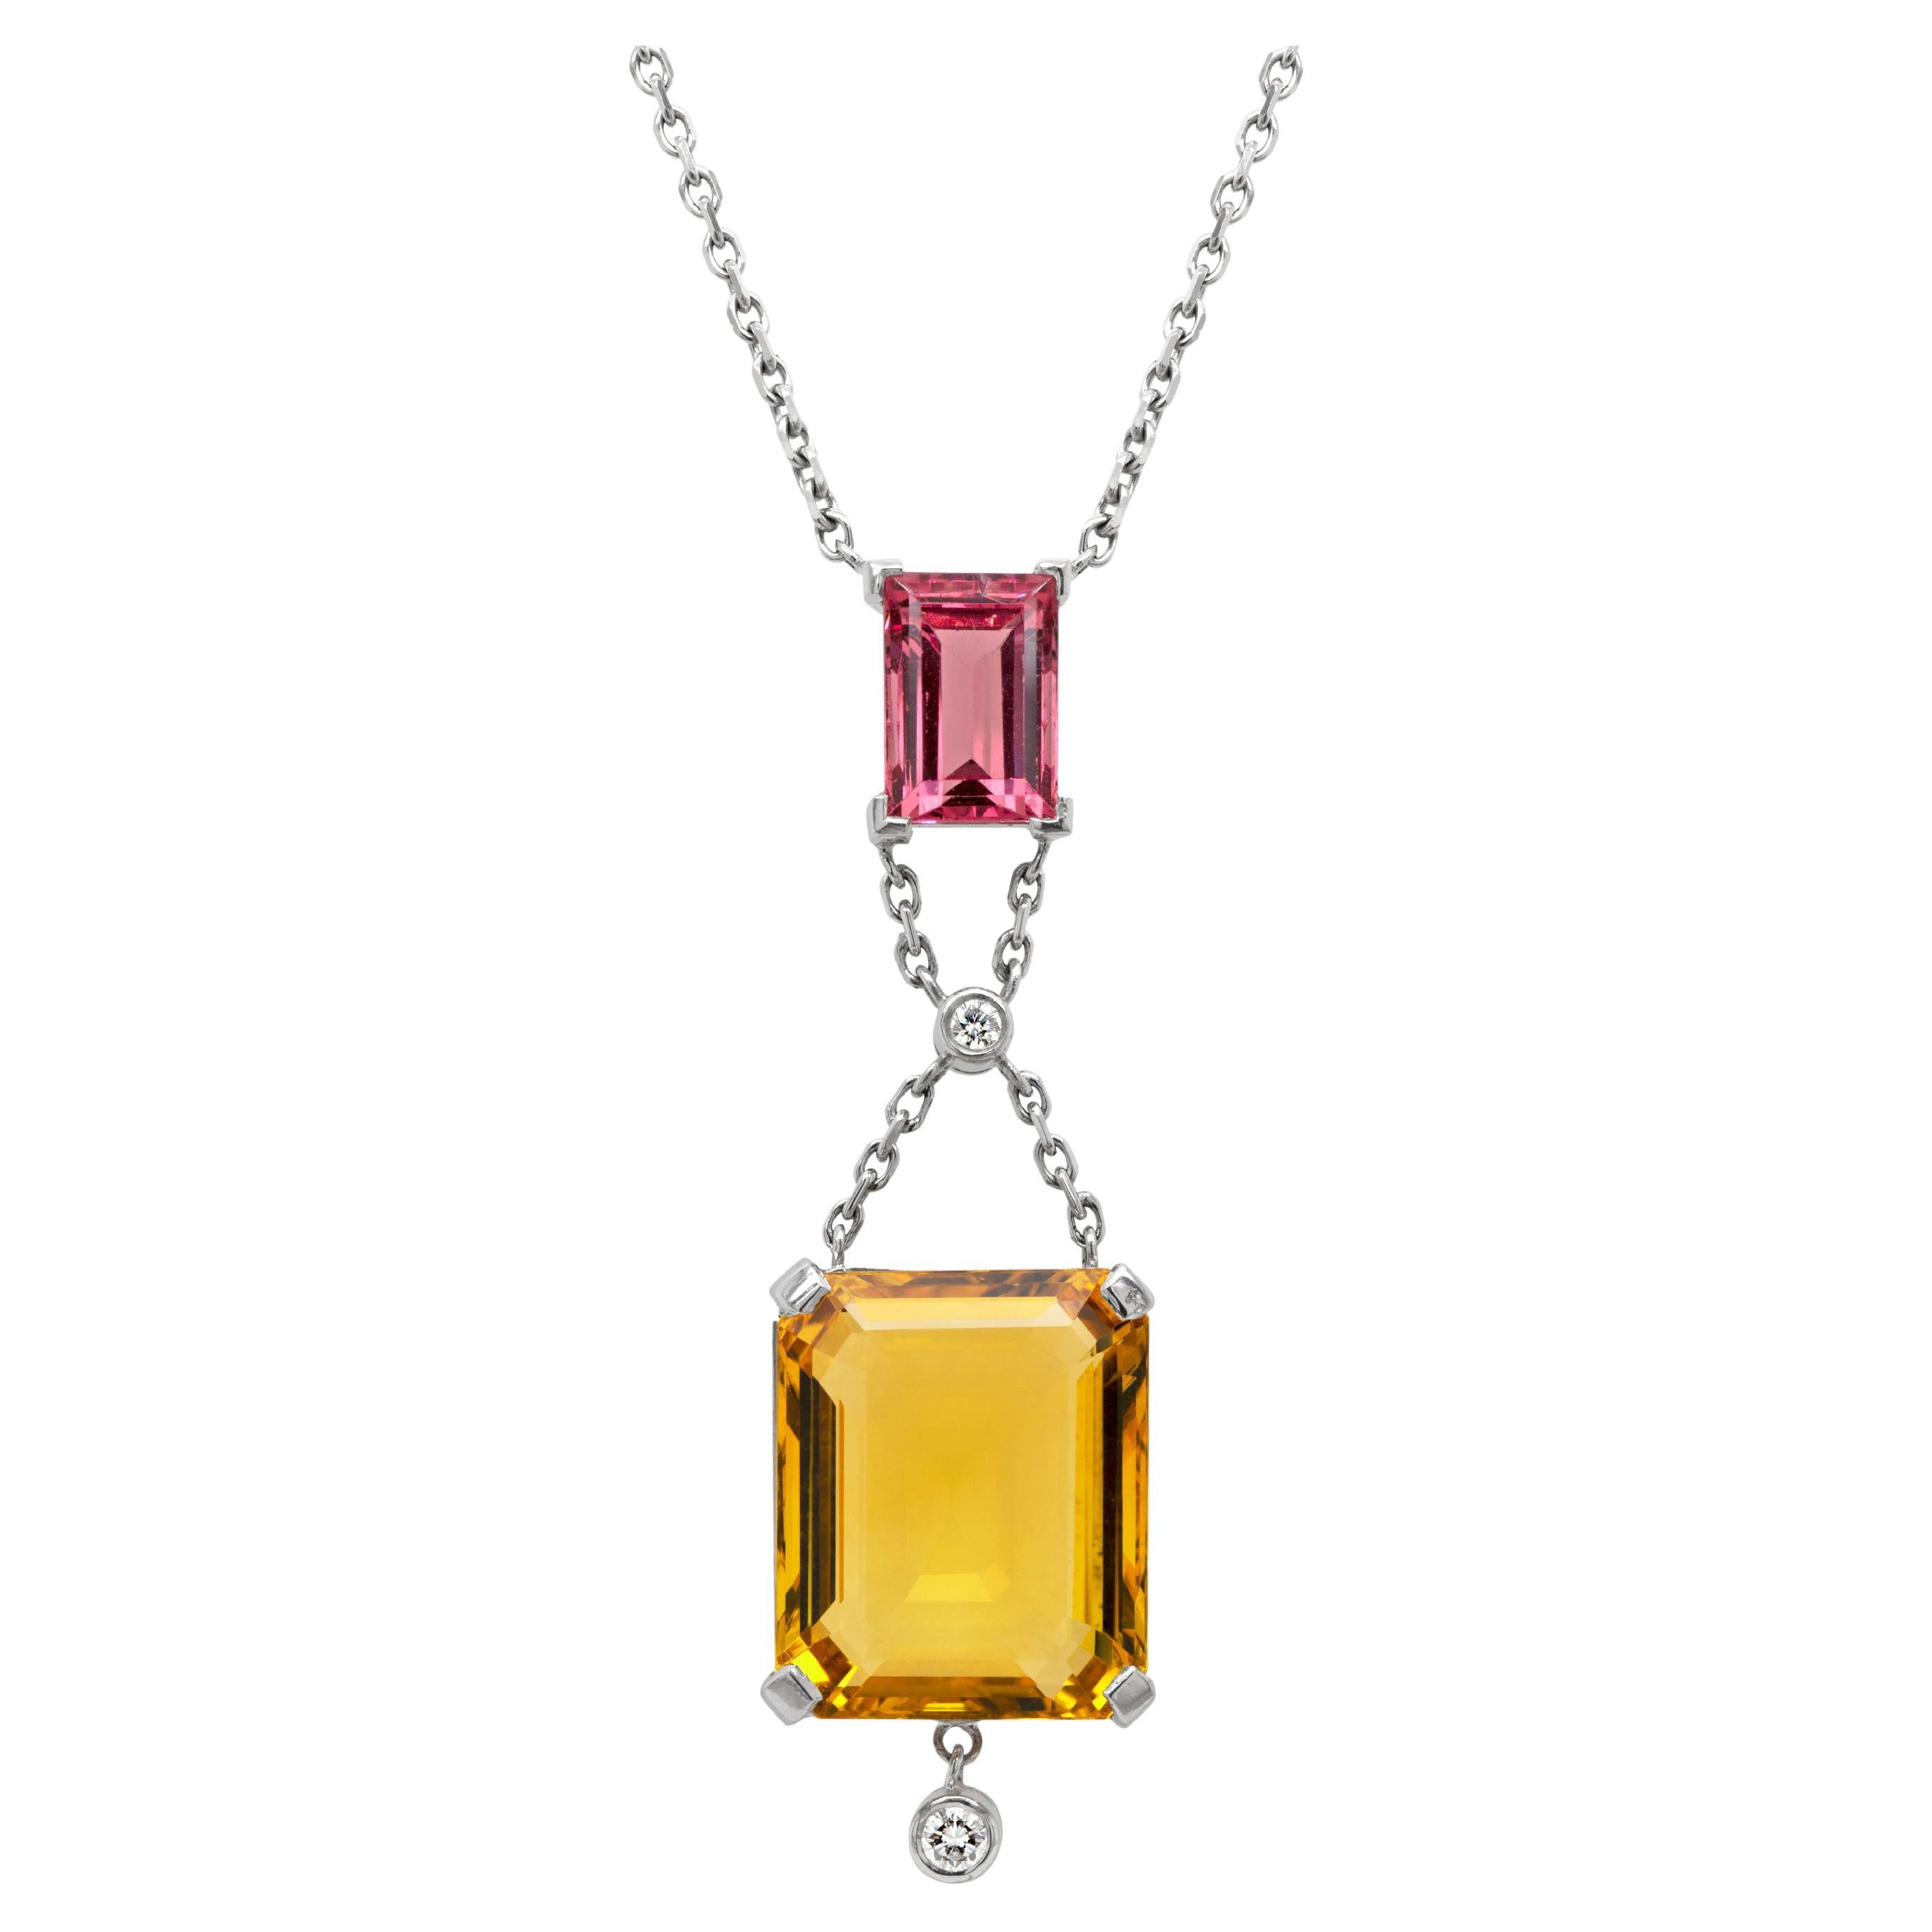 Diamond, Yellow Beryl and Pink Spinel 18 Carat White Gold Pendant Necklace For Sale